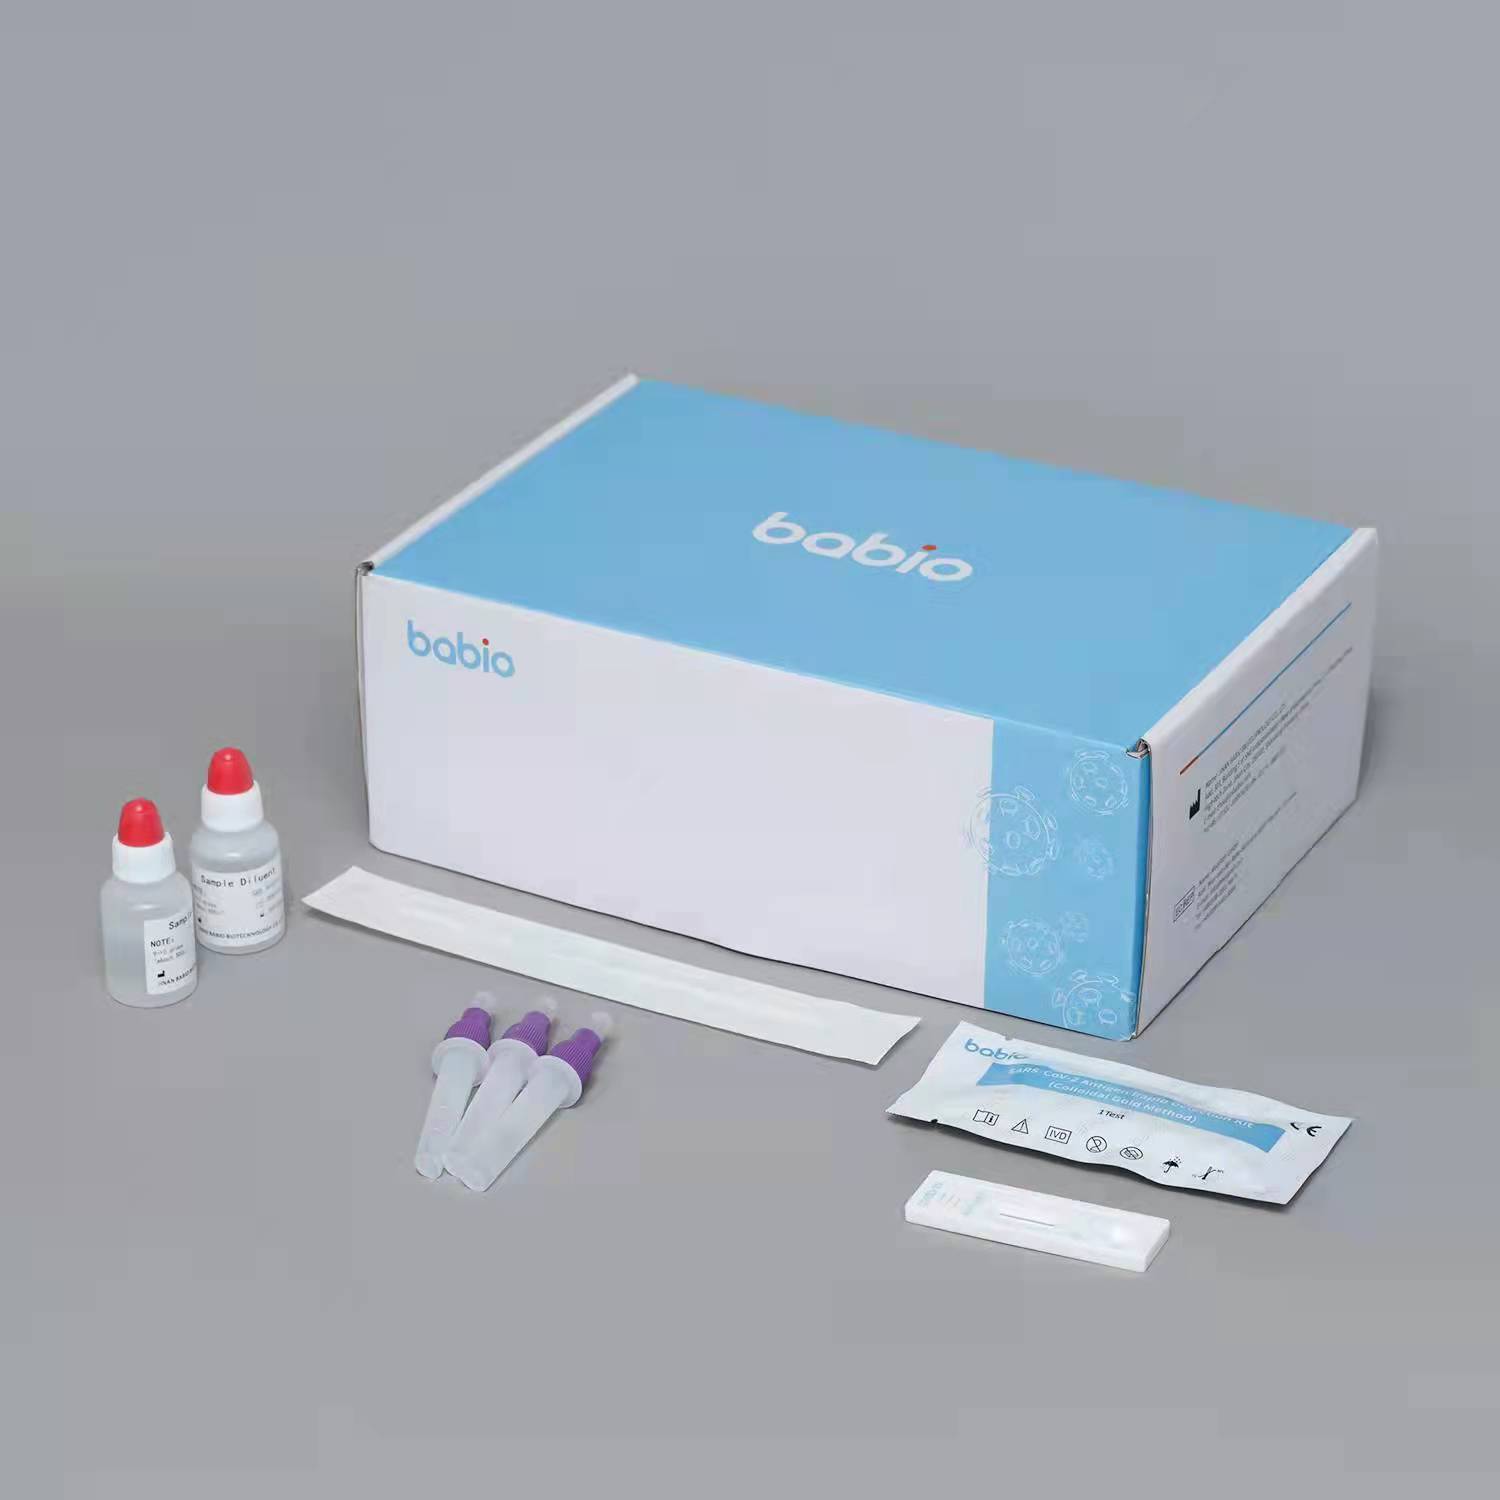 What are the test steps of Baibo Antigen Detection Kit?